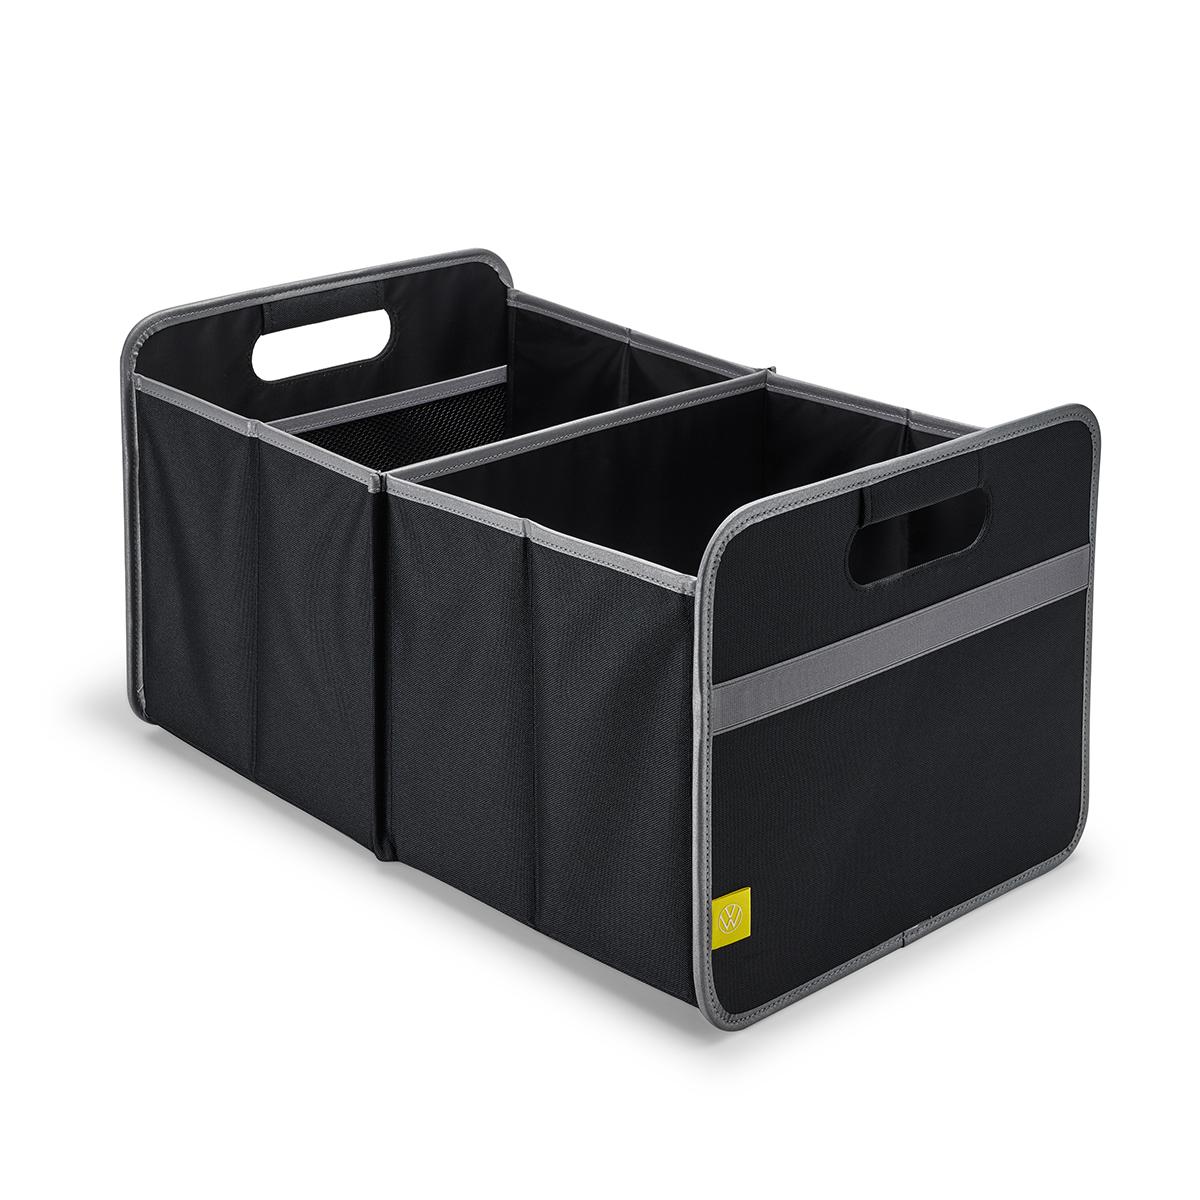 Foldable Storage Box Carries Up To 30 Kg - 5H0061104 - VW Vans